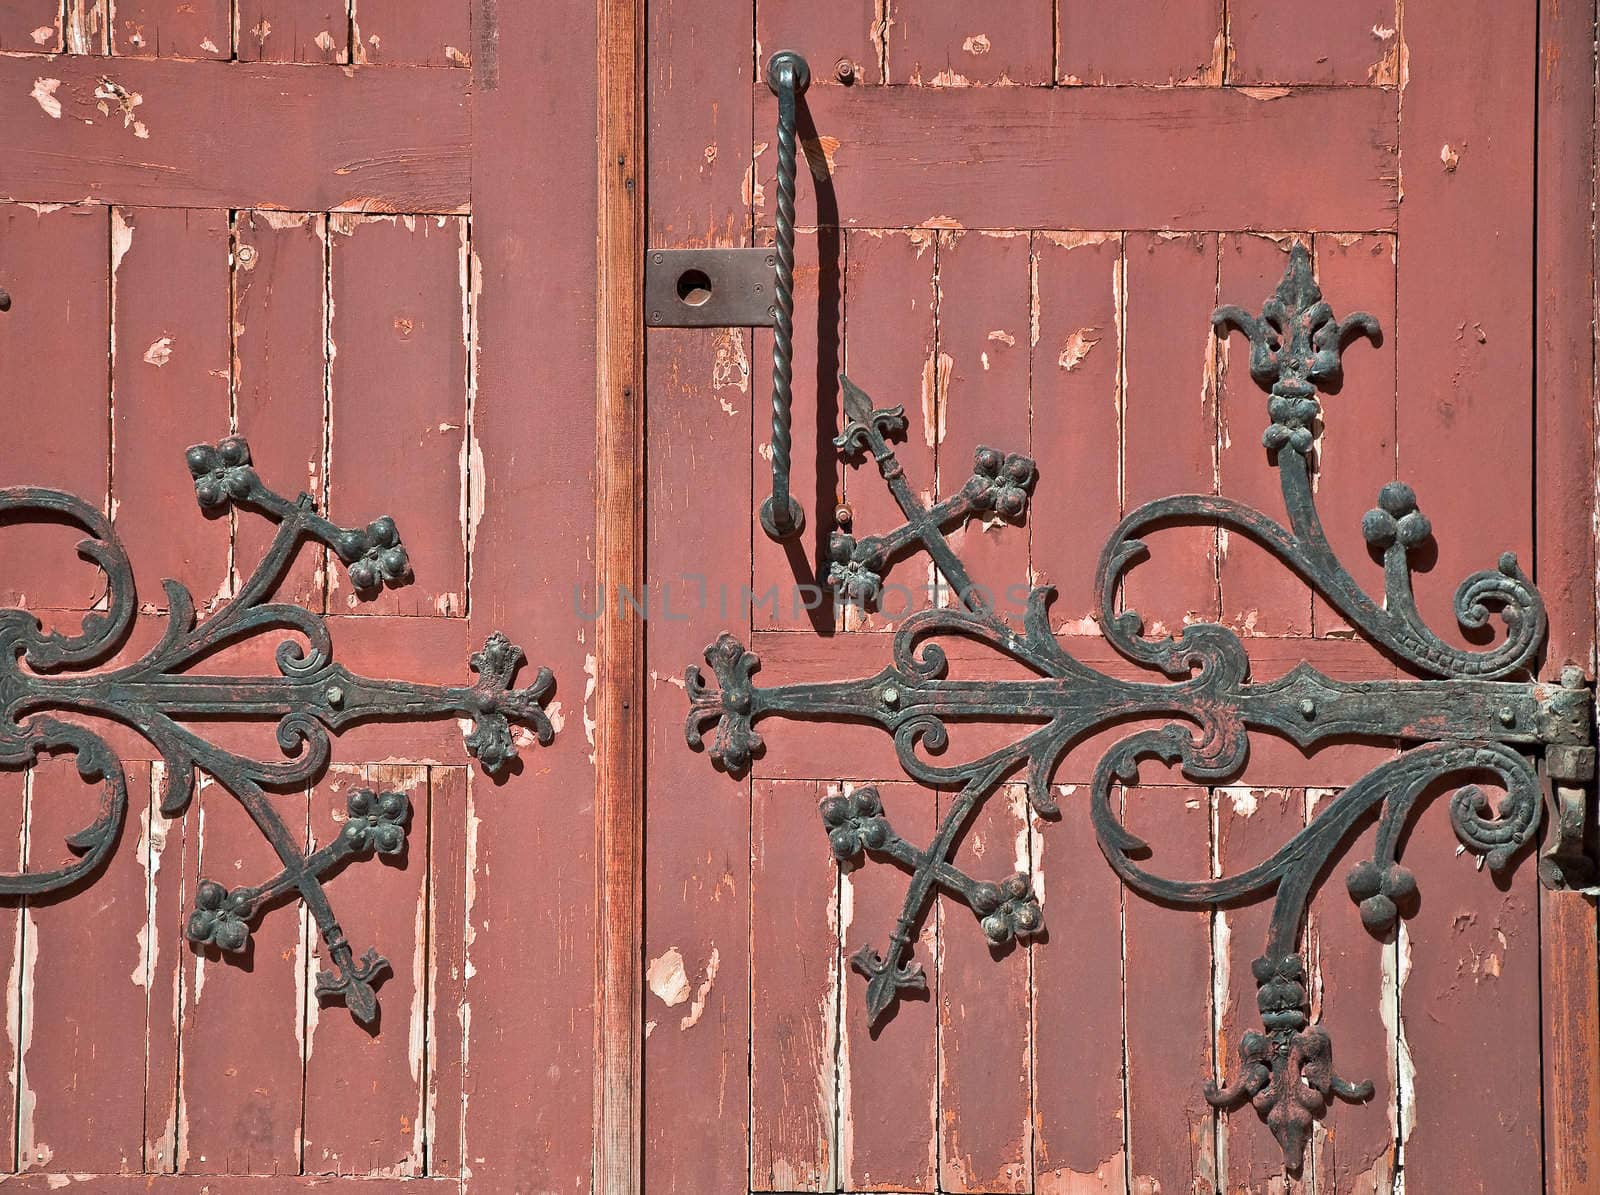 Detail of old wooden door with wrought iron handle. Close-up detail of the architecture.